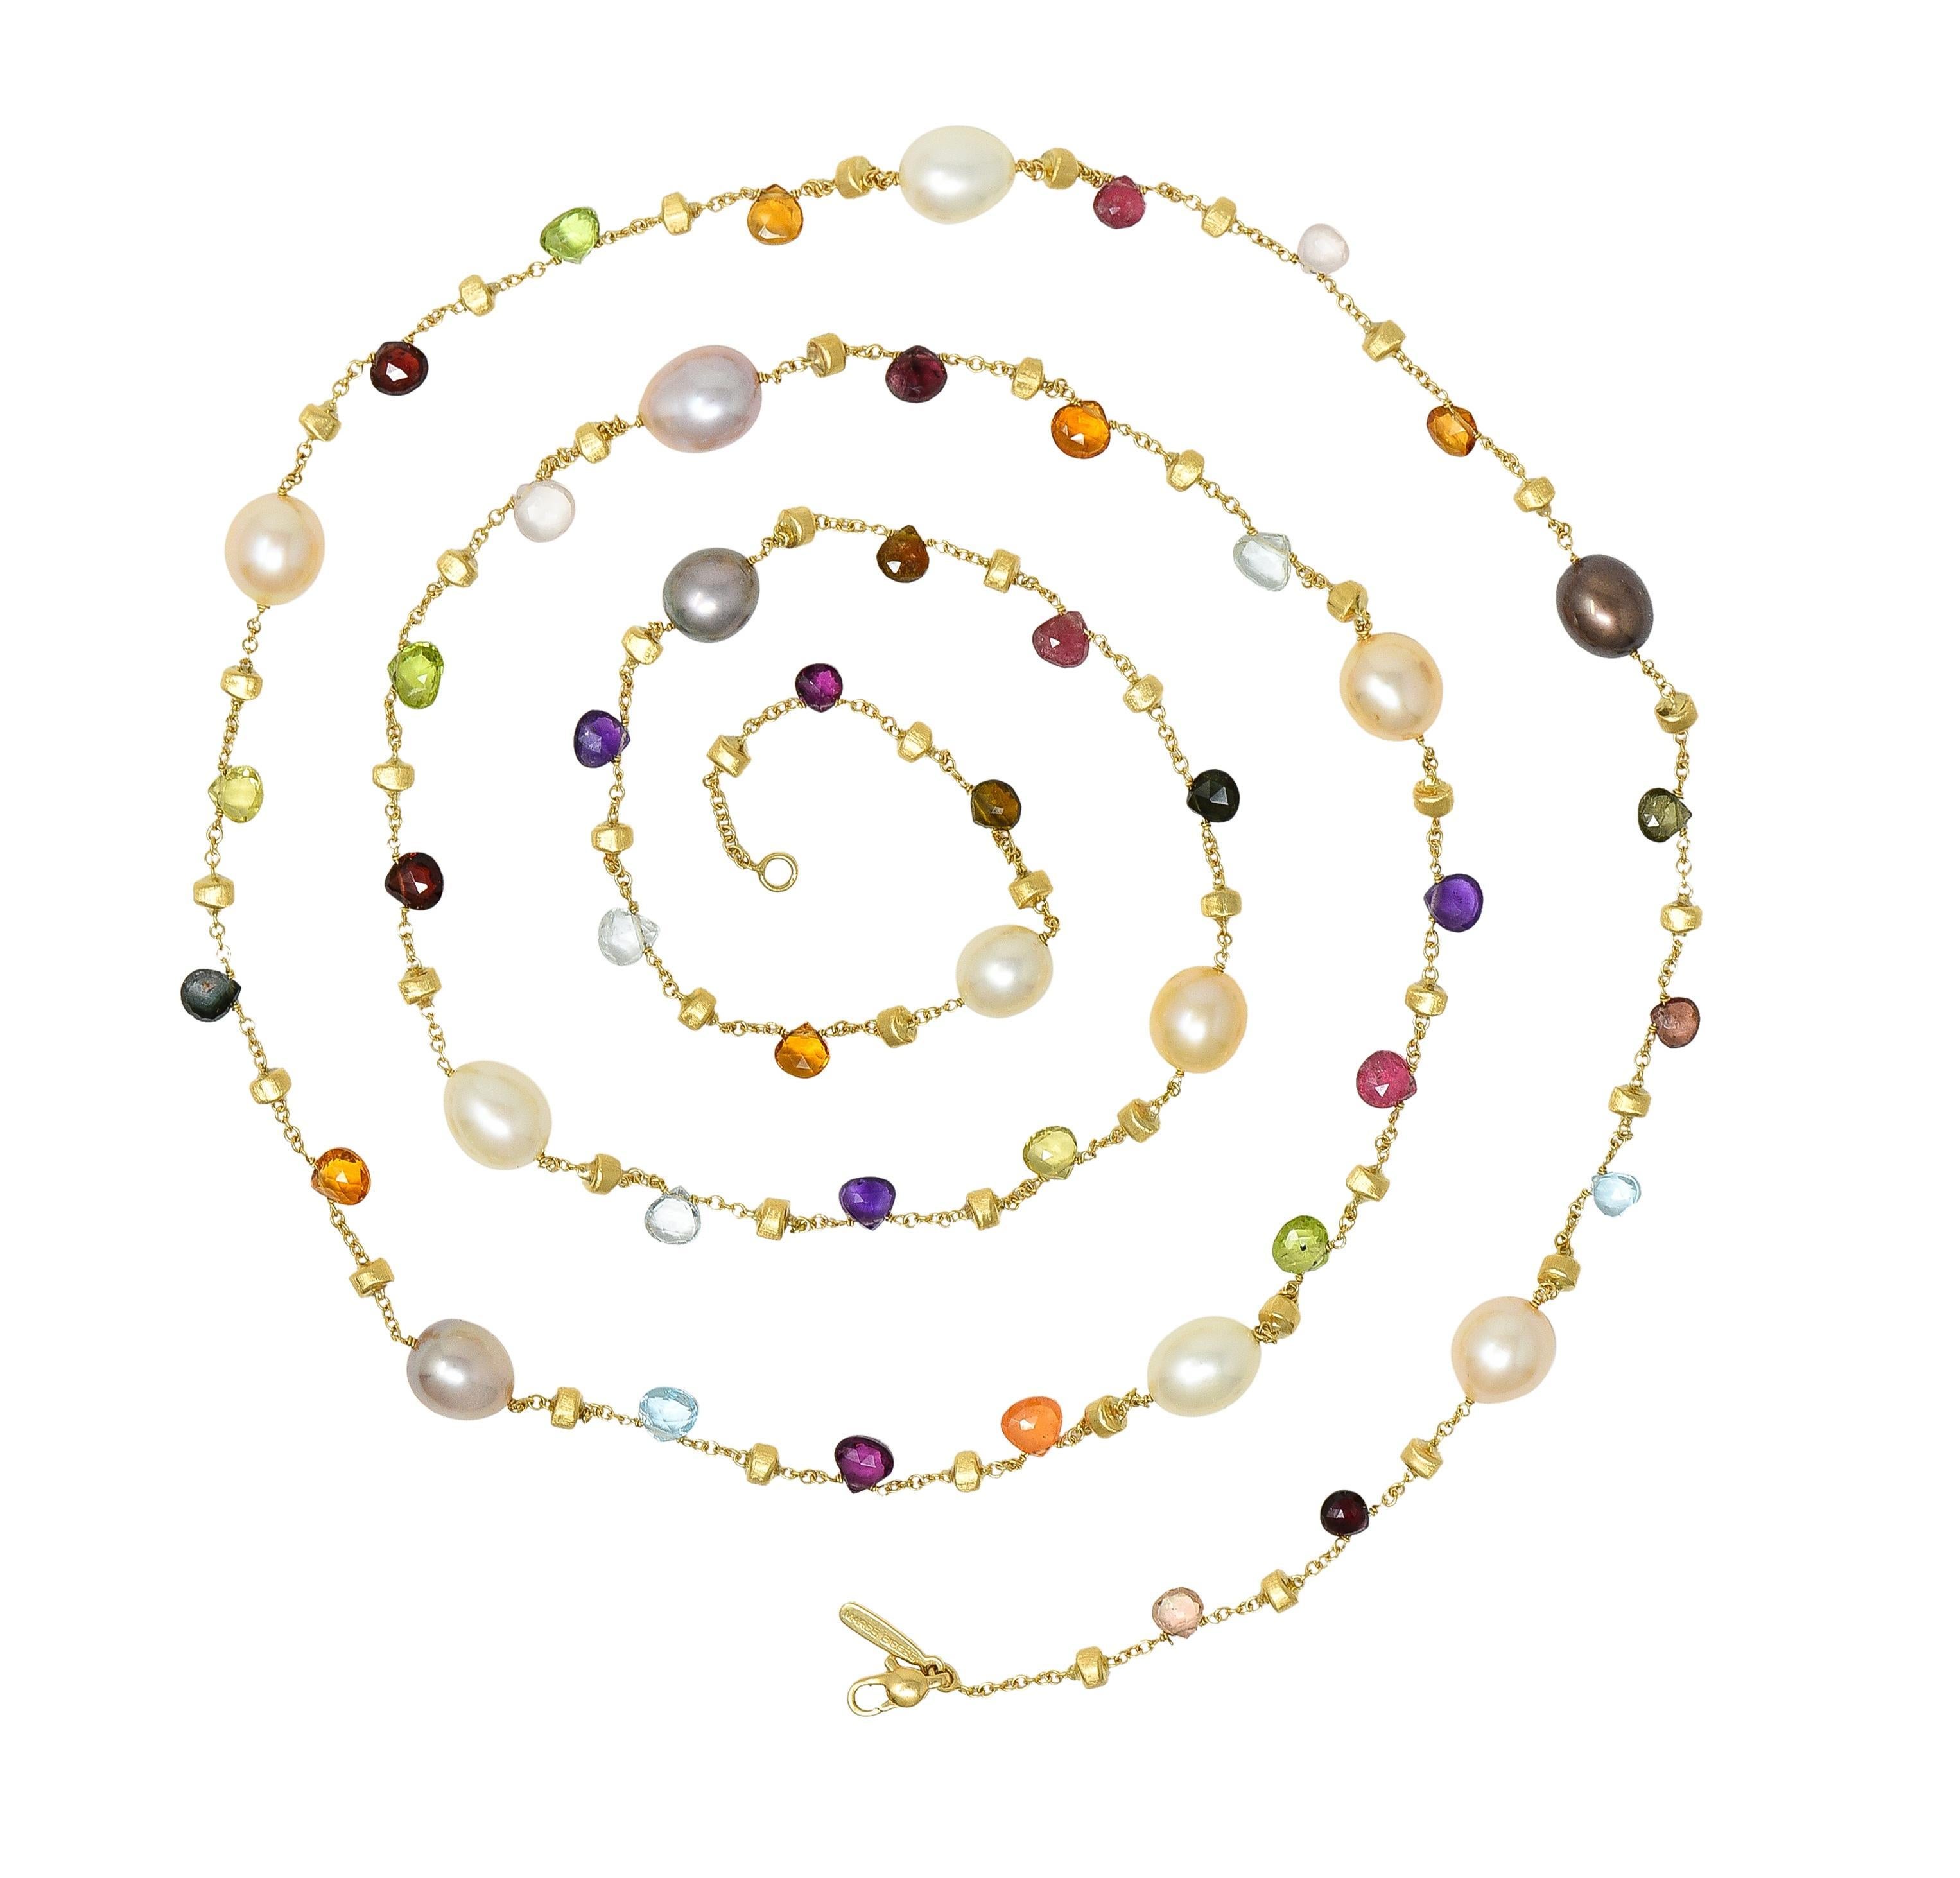 Featuring twelve baroque-shaped cultured pearl stations ranging in size from 8.0 to 9.0 mm
White, peach, pink, and black in body color with strong iridescence and excellent luster
Strung between amethyst, citrine, peridot, tourmaline, topaz, and